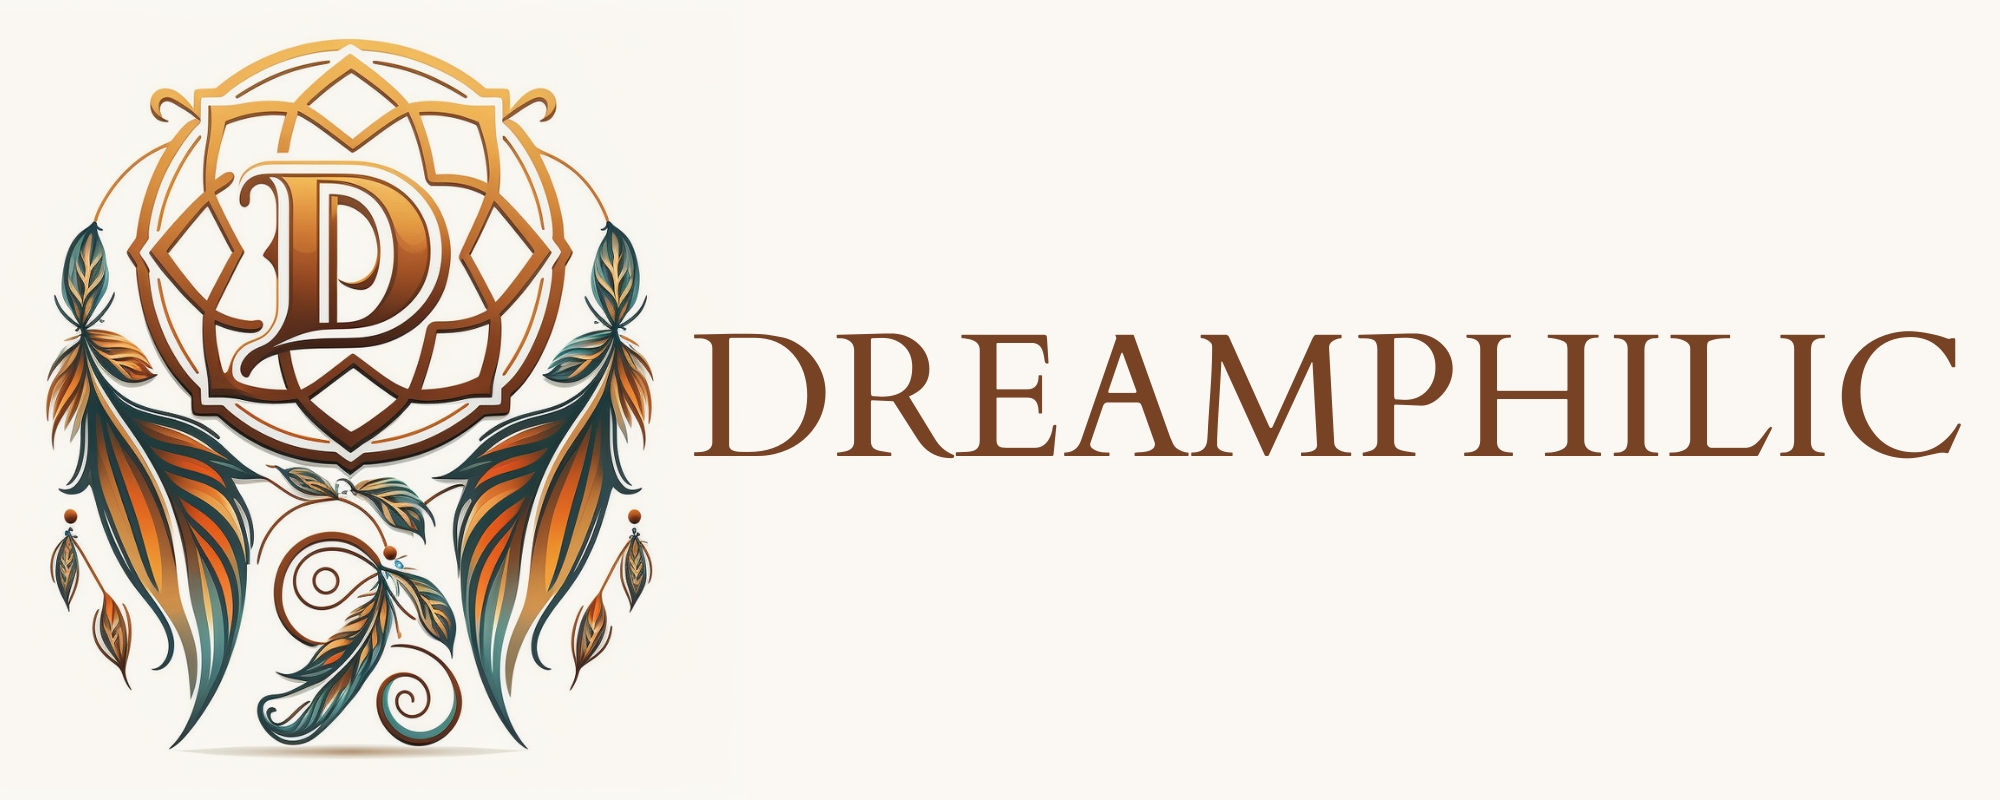 Dreamphilic - A content frontpage creator for artists